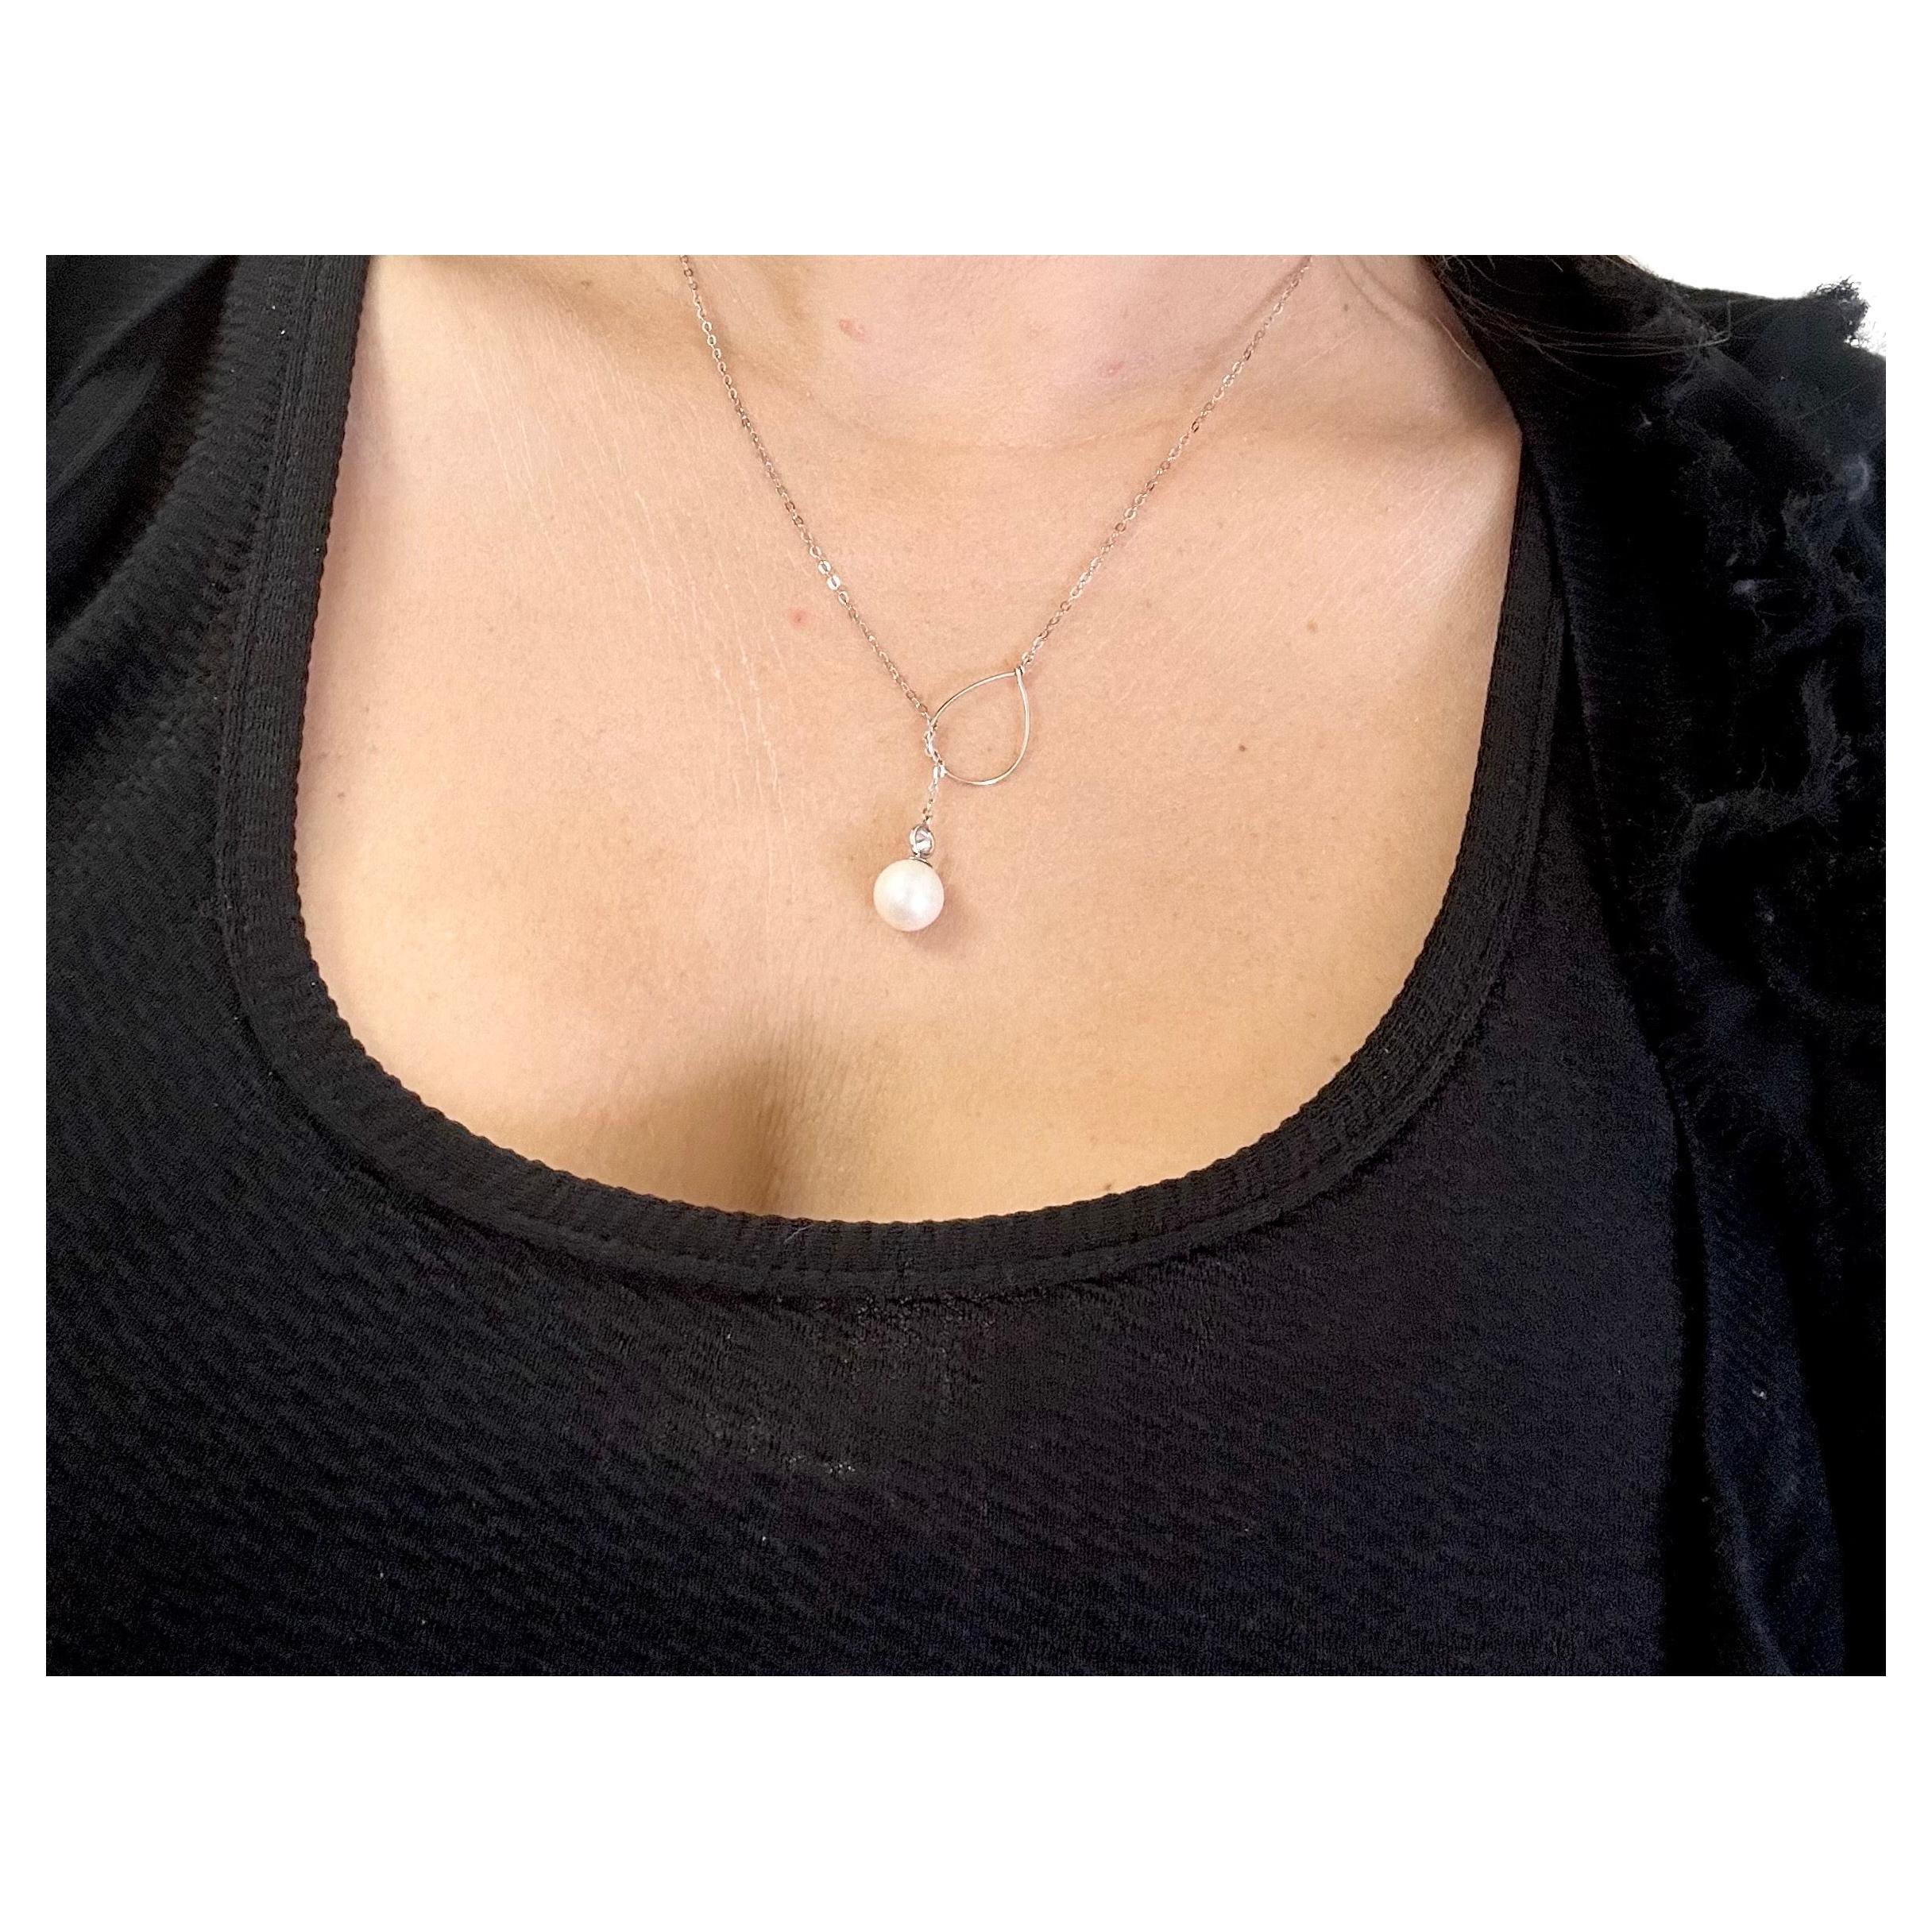 Unique pendant length can be changed from choker to long, adjustable.Made with natural freshwater pearl and Canadian diamond in 14KT gold.


Metal: 14KT white gold
Natural pearl:
Color: white
Gram(s) weight: 3 grams app.
Pearl Size:8mm
Clarity: Eye